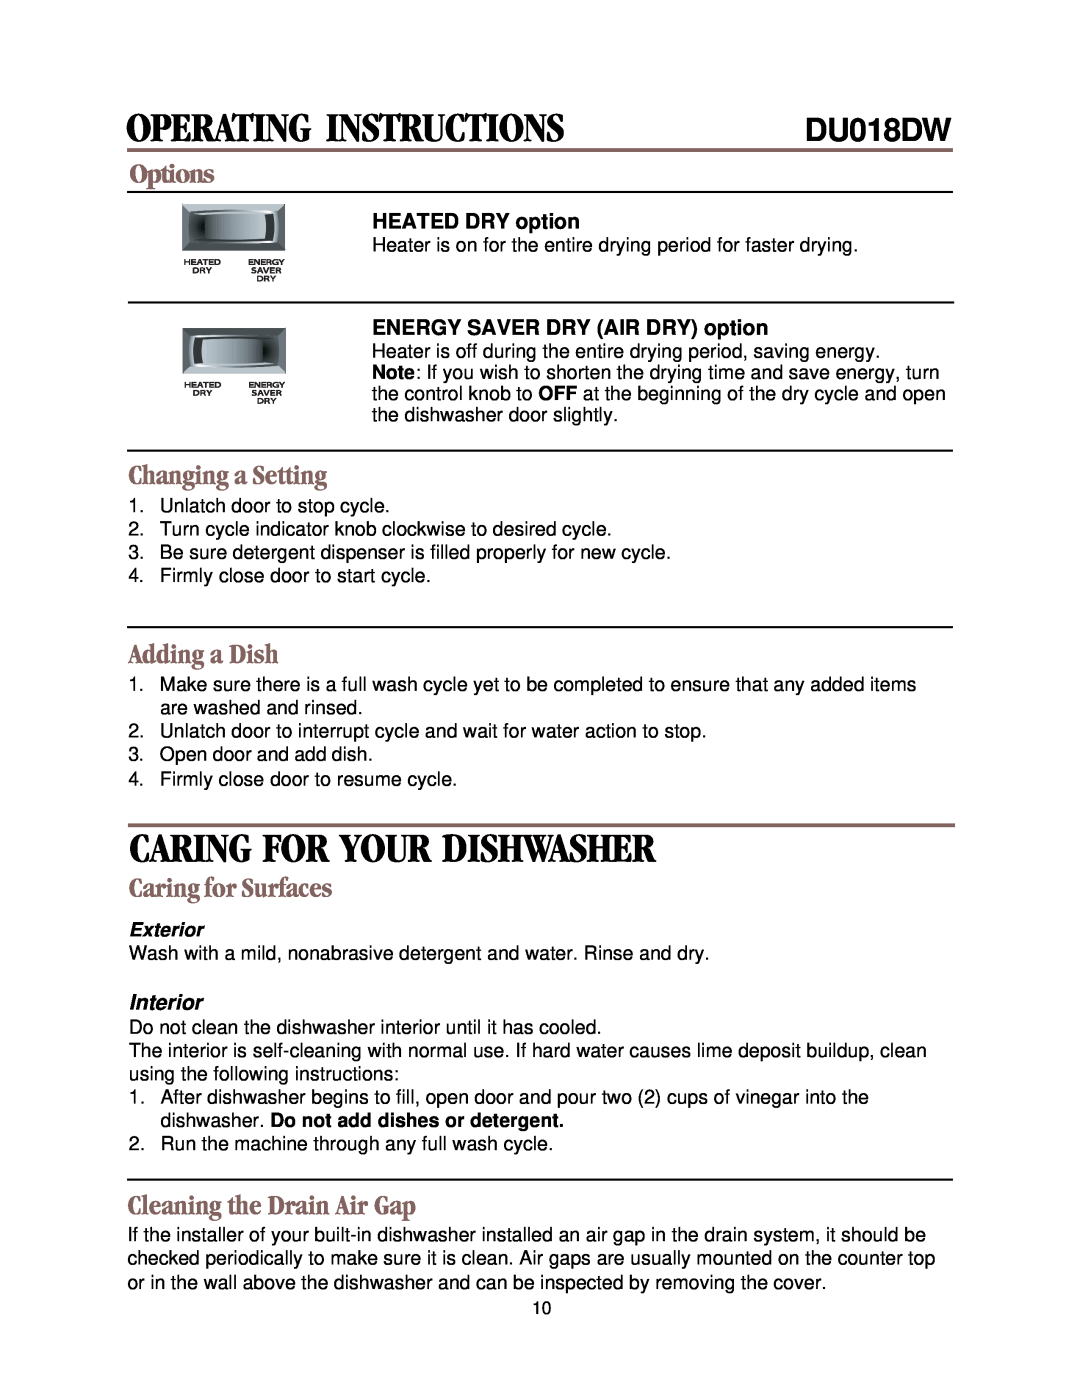 Whirlpool DU018DW Caring For Your Dishwasher, Options, Changing a Setting, Adding a Dish, Caring for Surfaces, Interior 